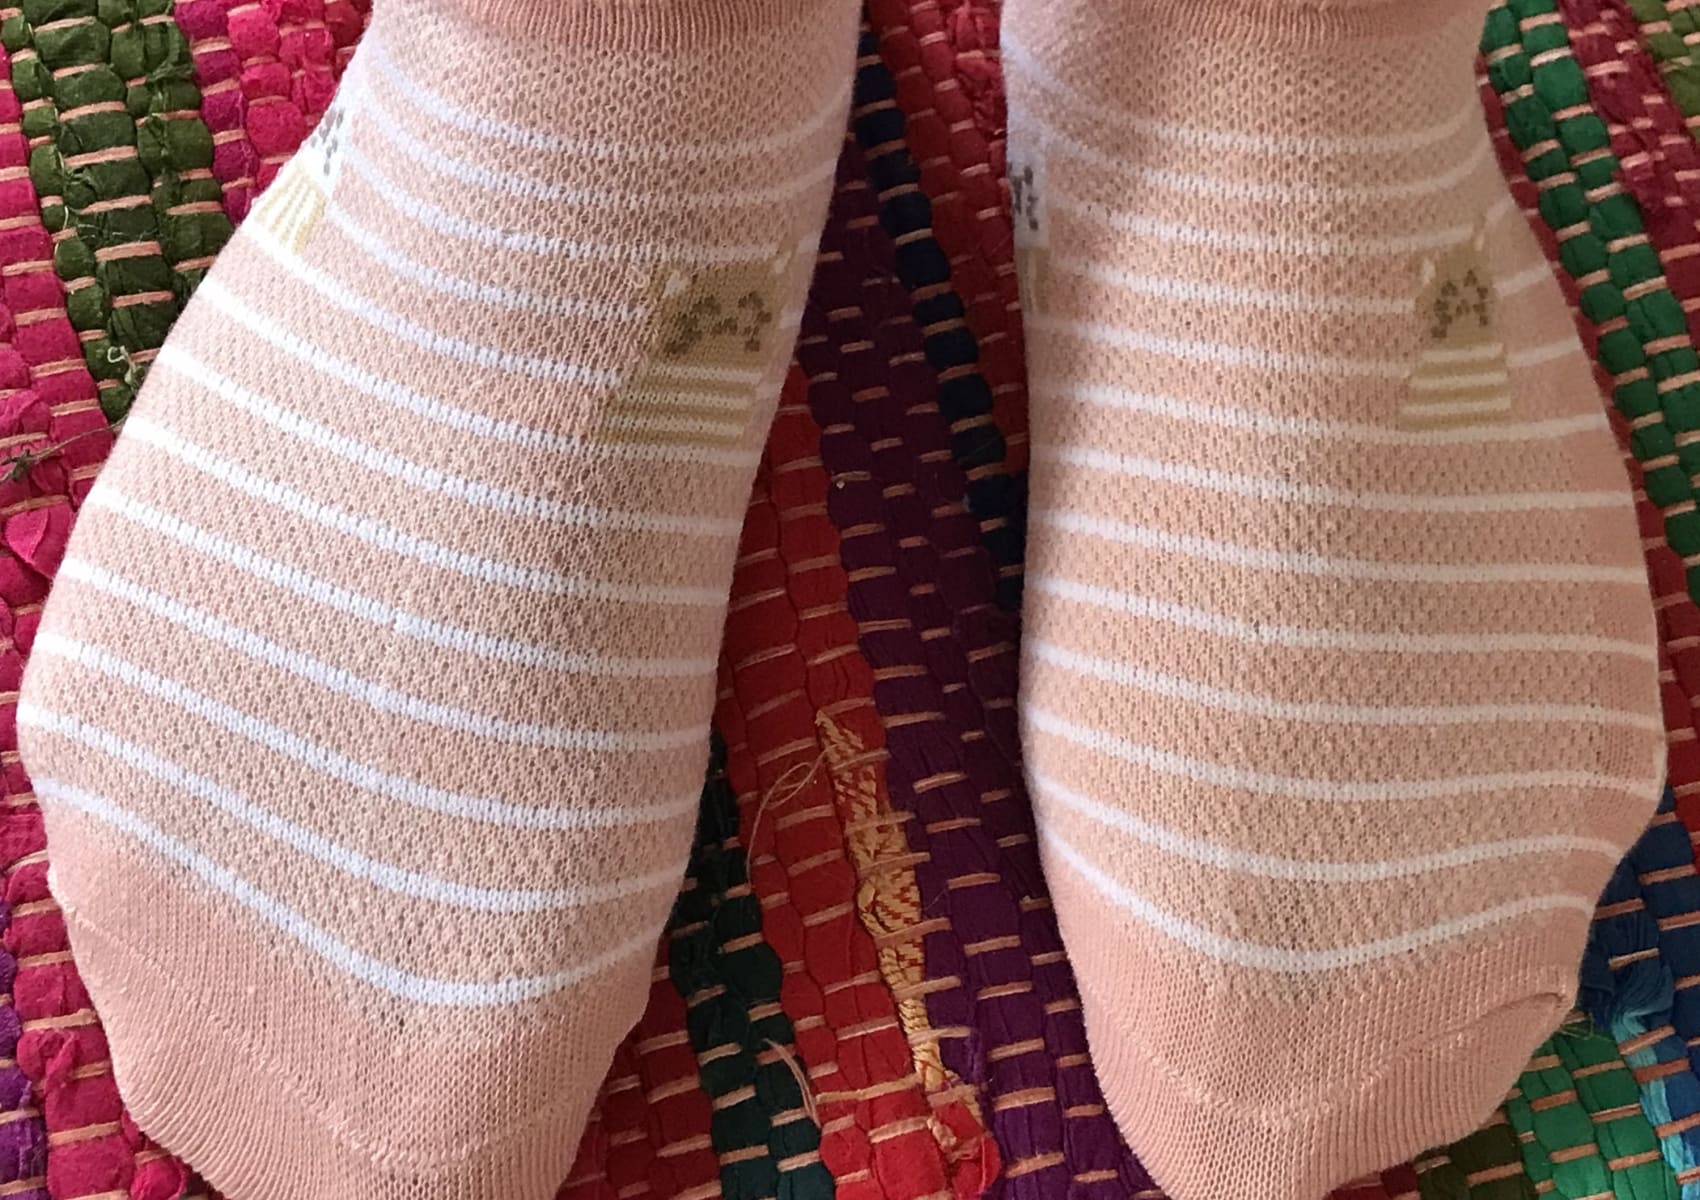 Pale pink striped shortie socks with cute stripy cats